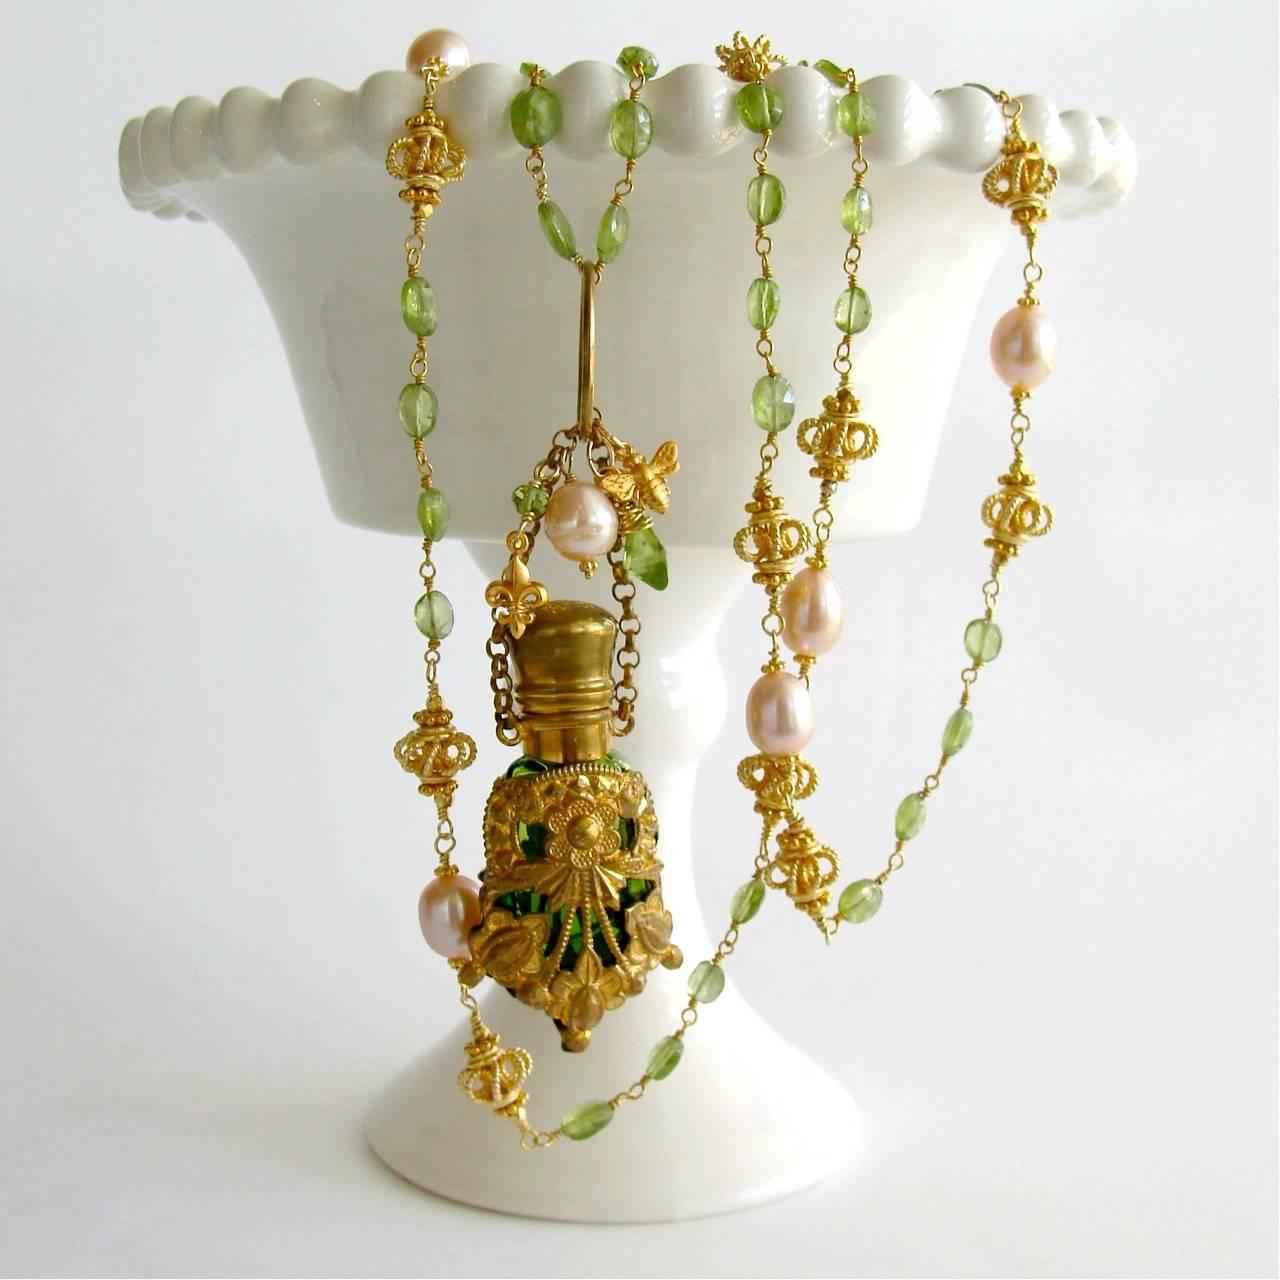 Juliana Necklace.

A remarkable peridot green glass Victorian scent bottle (c. 1900) - embellished with gold gilt floral and cartouche casing - has now become the featured pendant of this new necklace design.  Although the glass stopper is